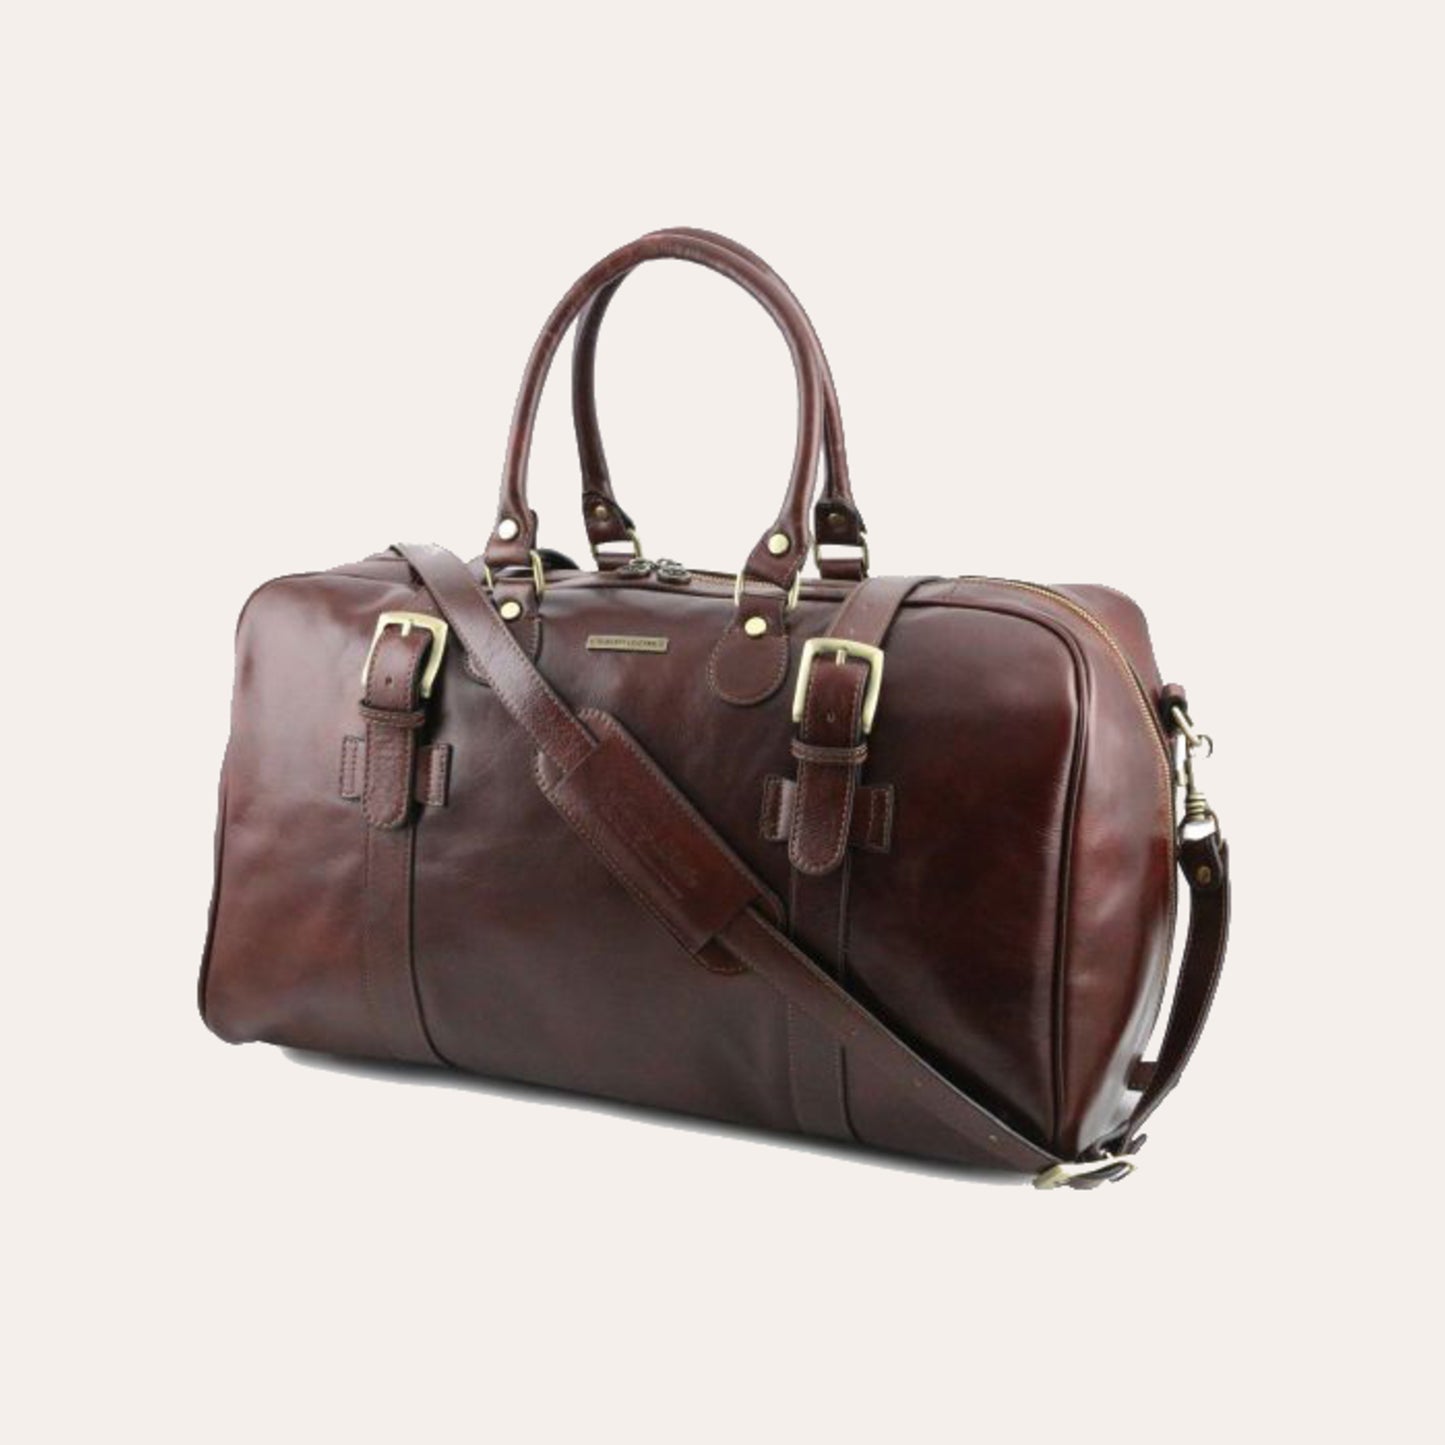 Tuscany Leather Brown Leather Travel Bag-Large Size